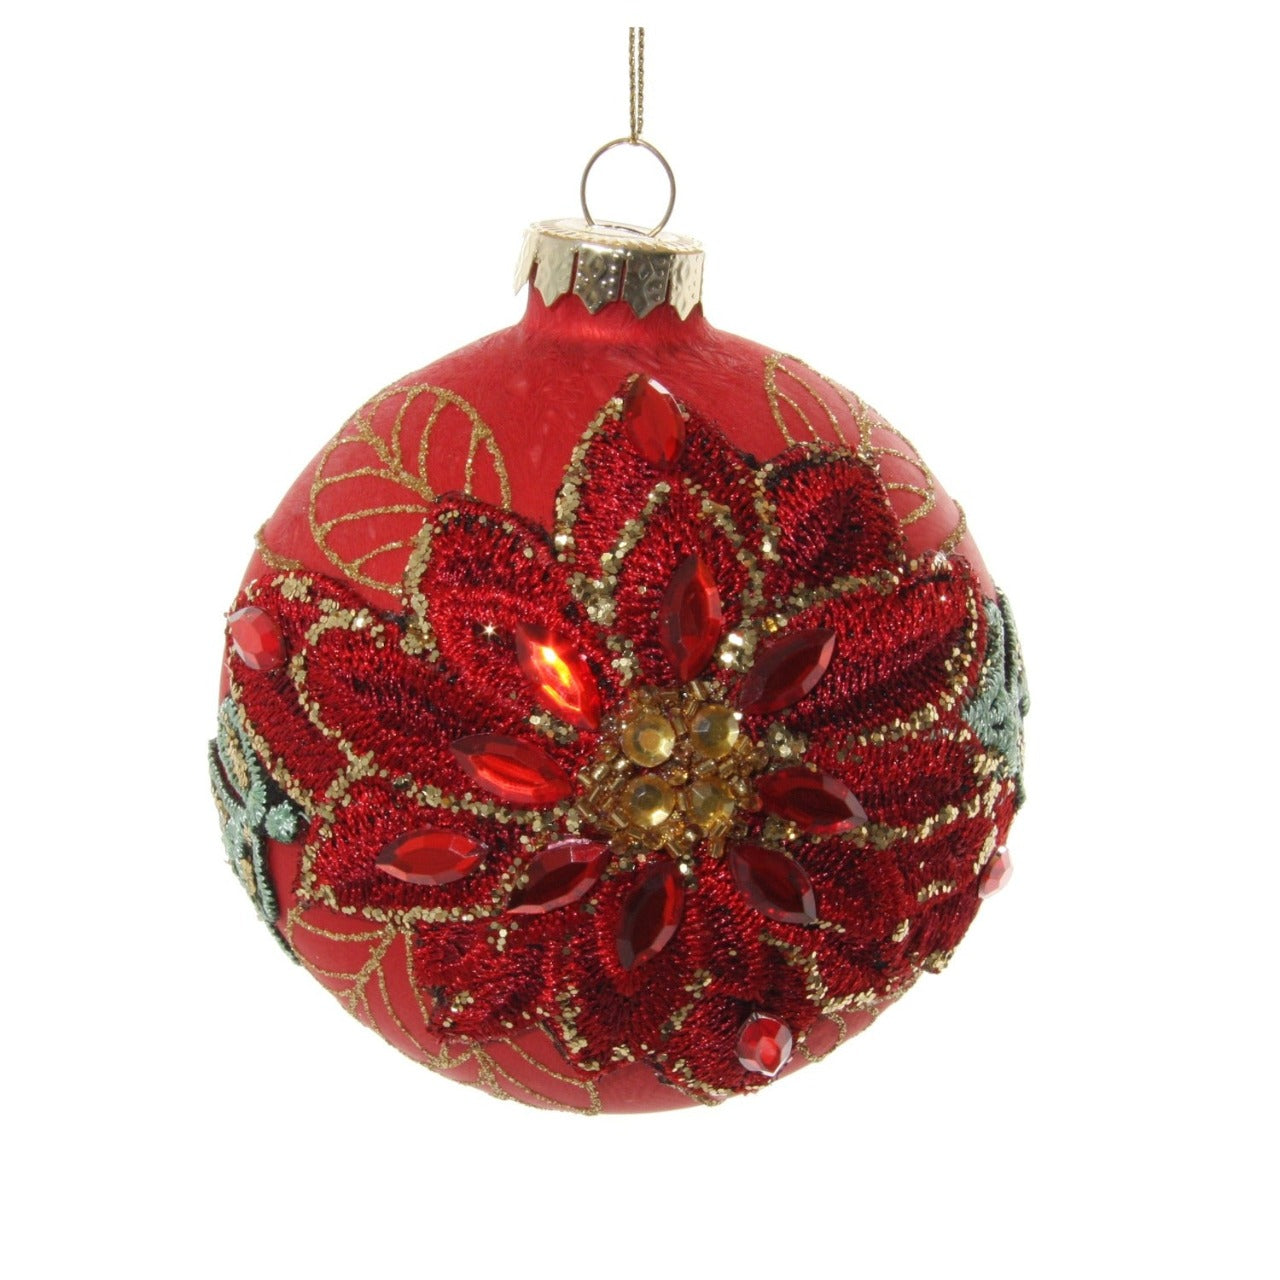 Shishi Glass Red Ball Frosted with Poinsettia Embroidery Hanging Ornament